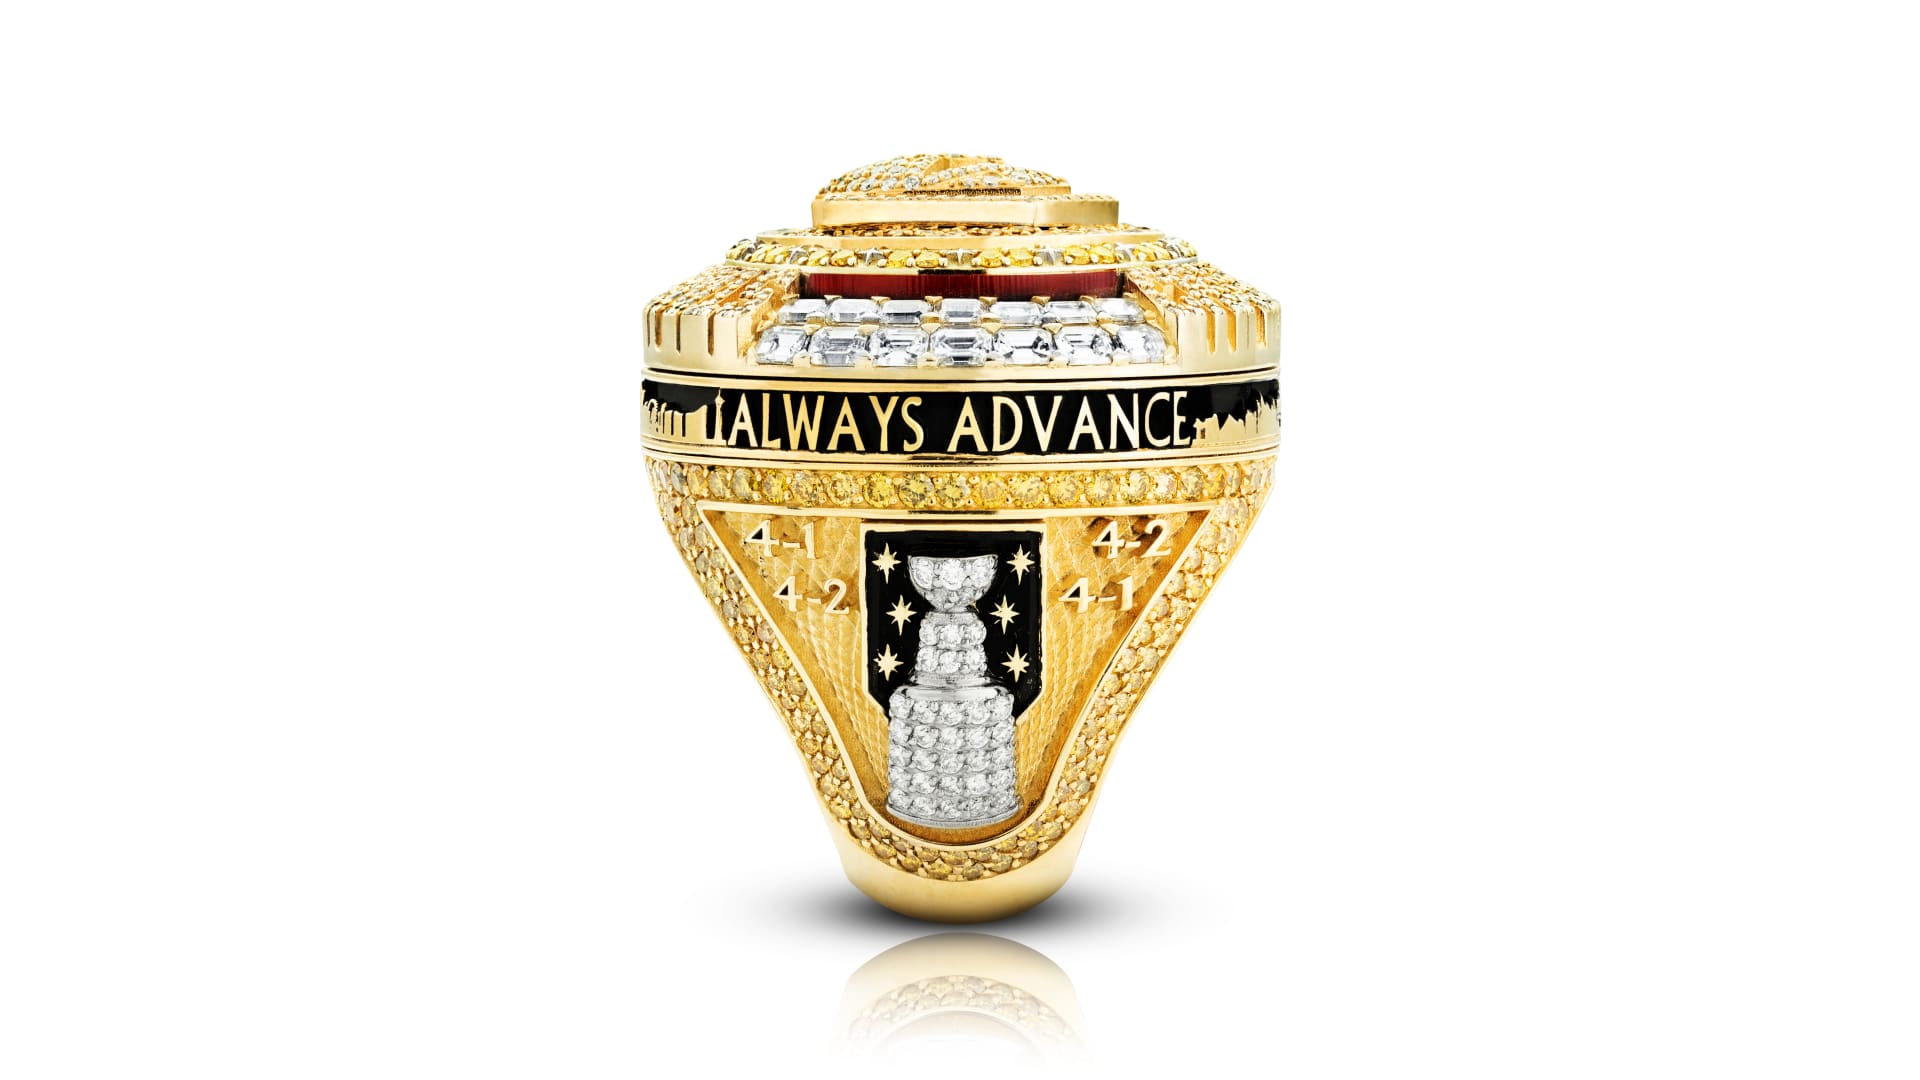 2022 National League Championship Ring Details